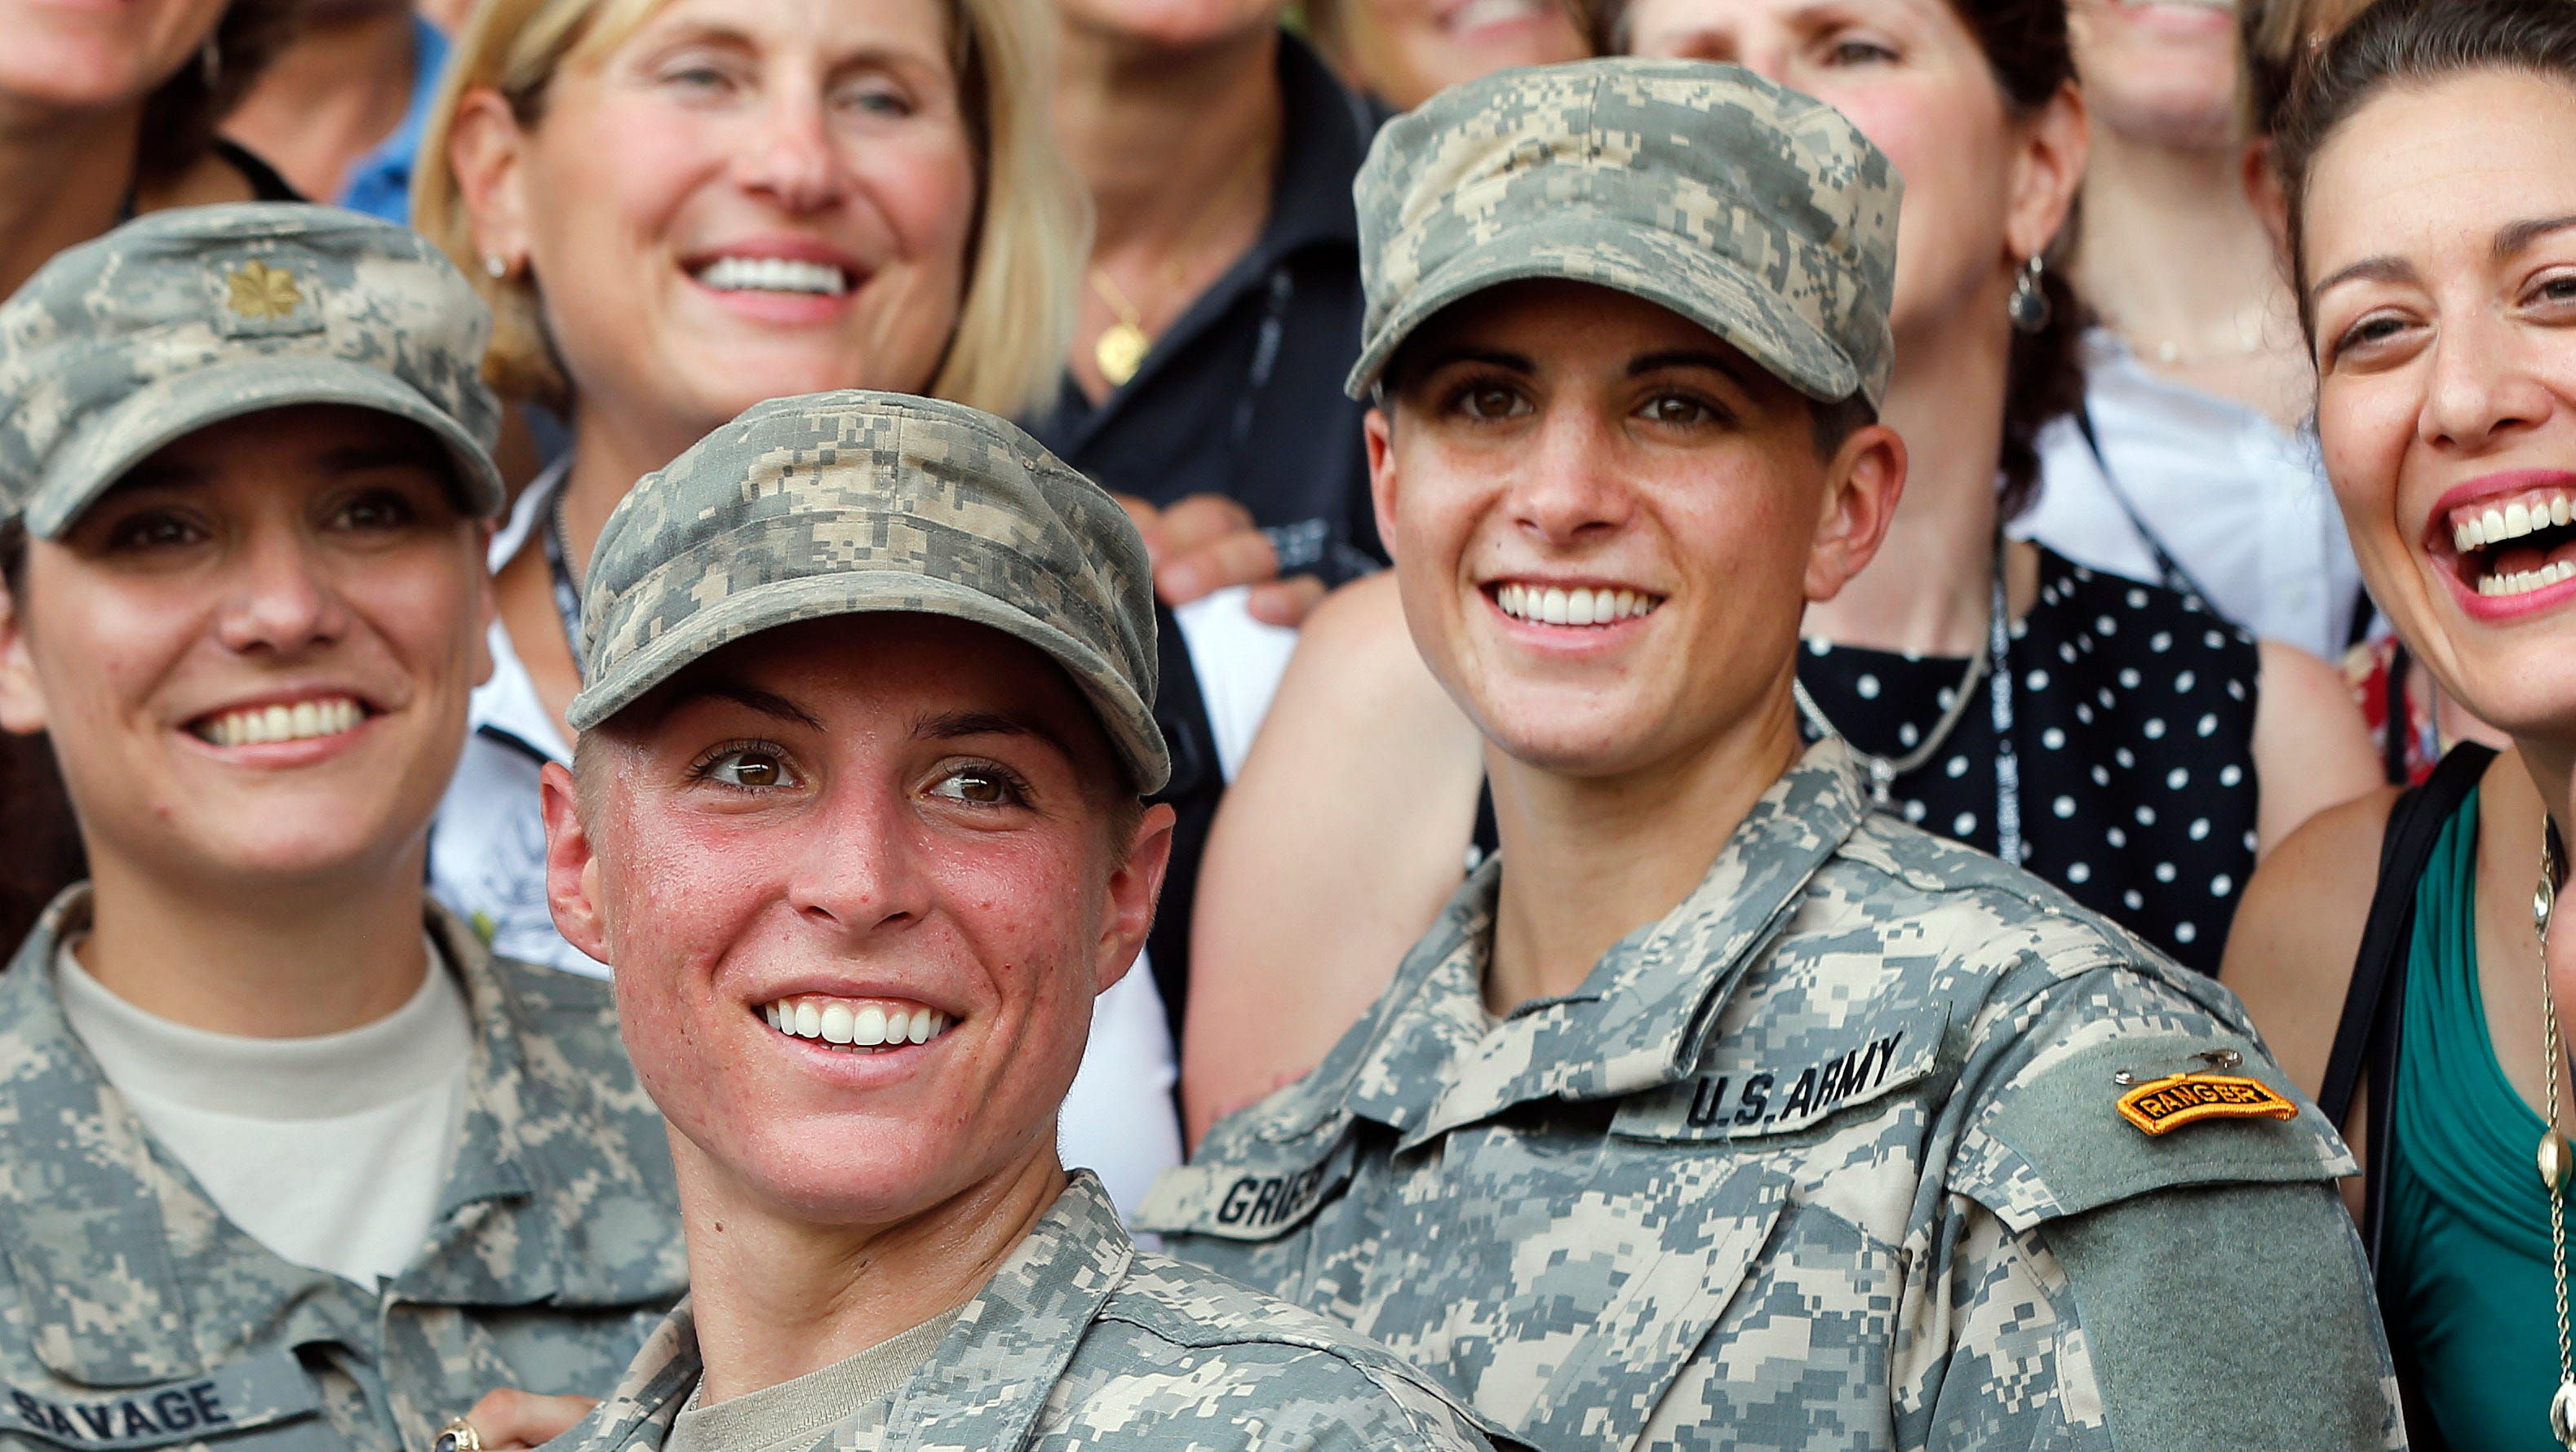 Should women be required to register for potential military draft?